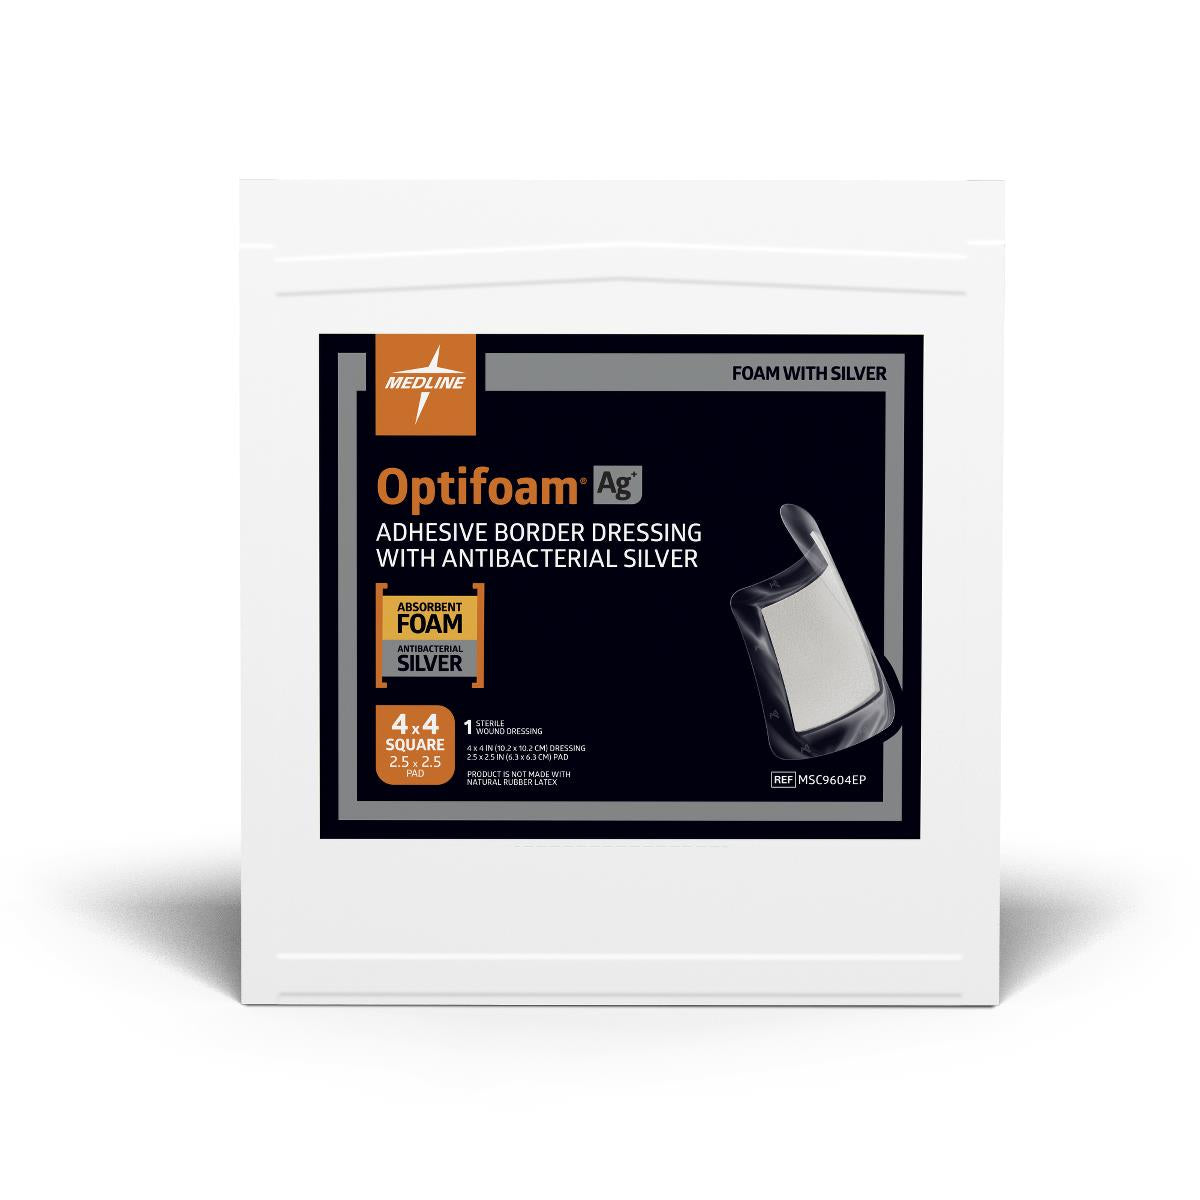 Medline Optifoam dressing with silver. Each dressing has an adhesive boarder with antibacterial silver.